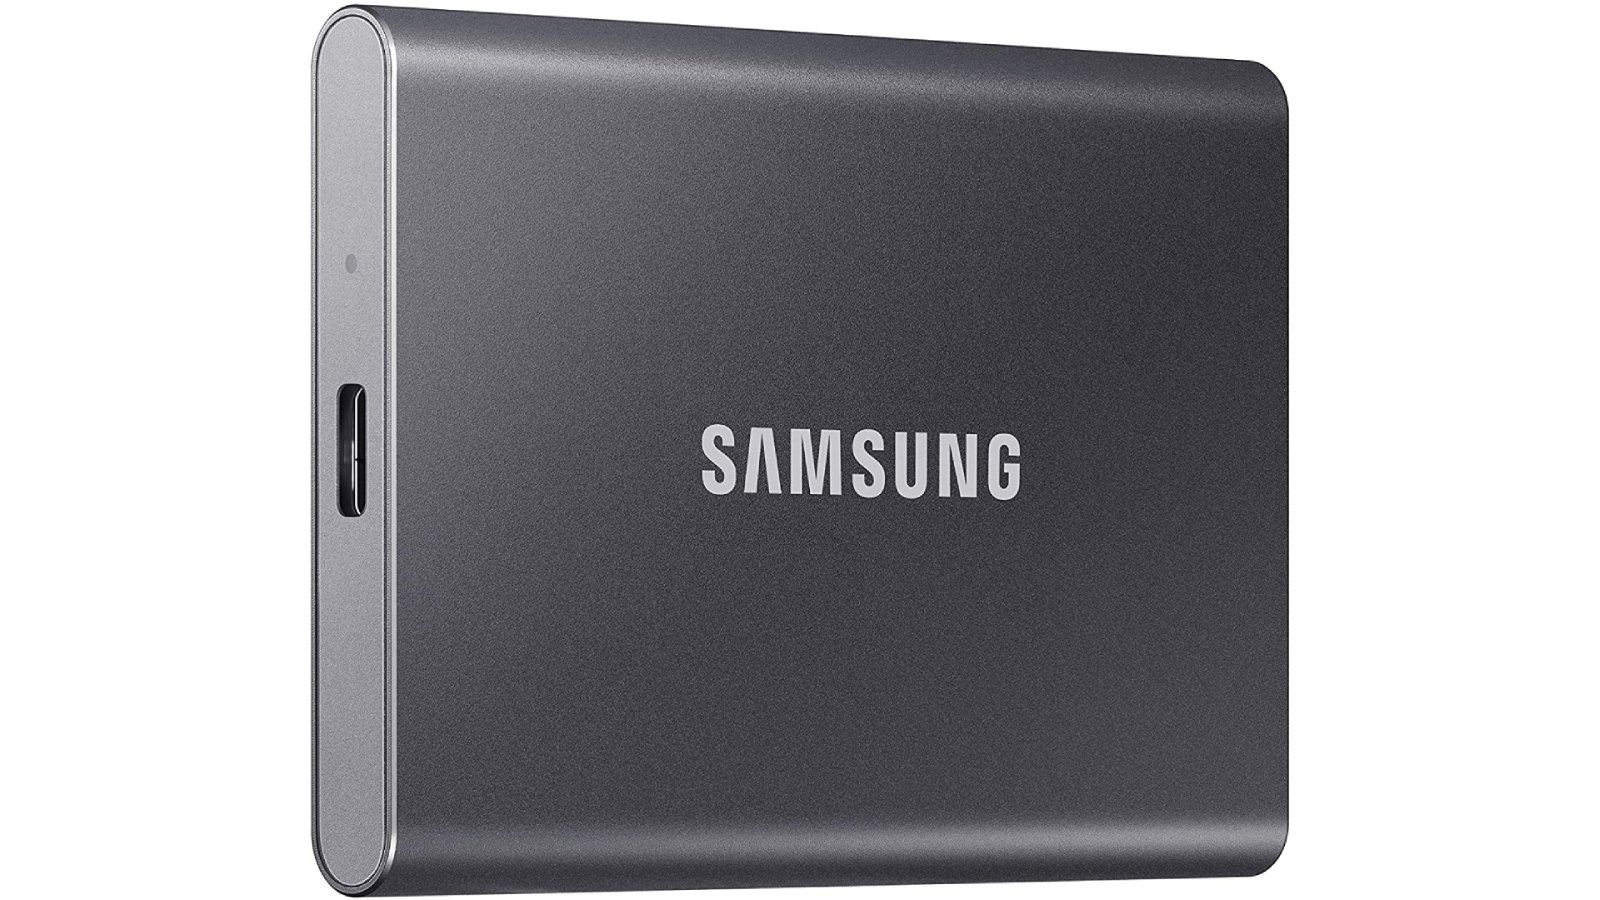 Samsung SSD T7 Portable External Solid State Drive 1TB Cyber Monday Deal